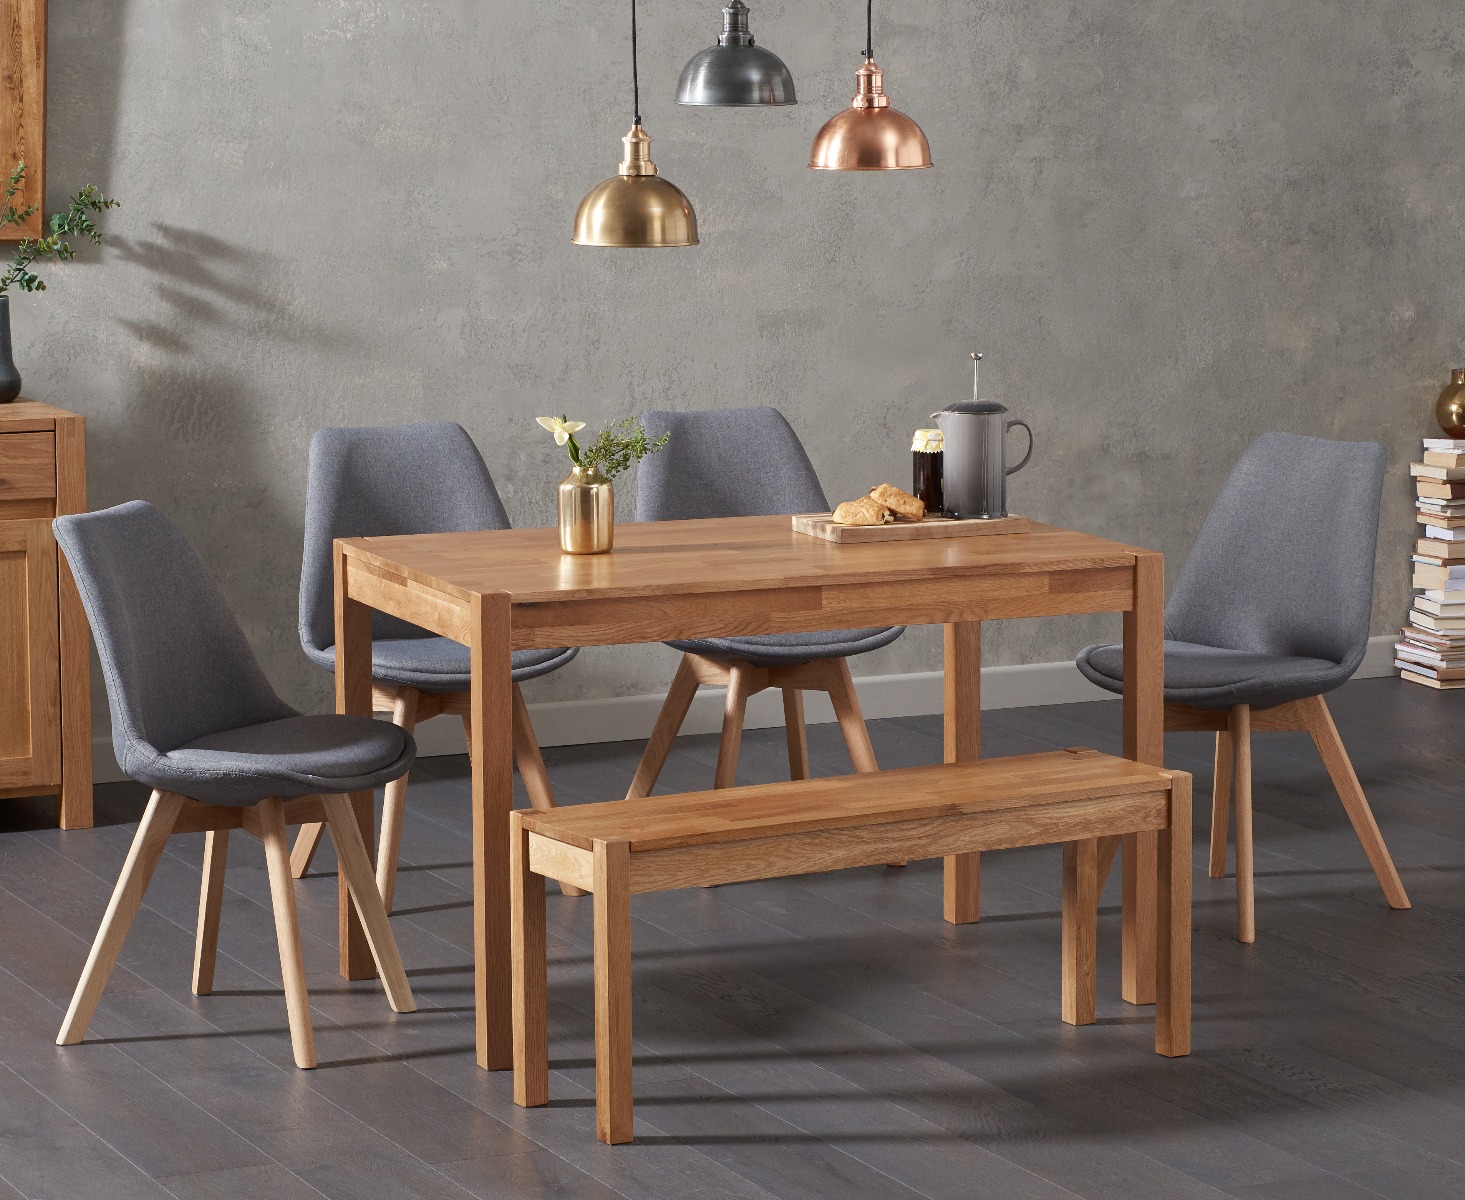 York 150cm Solid Oak Dining Table With 2 Light Grey Orson Fabric Chairs And 1 York Bench